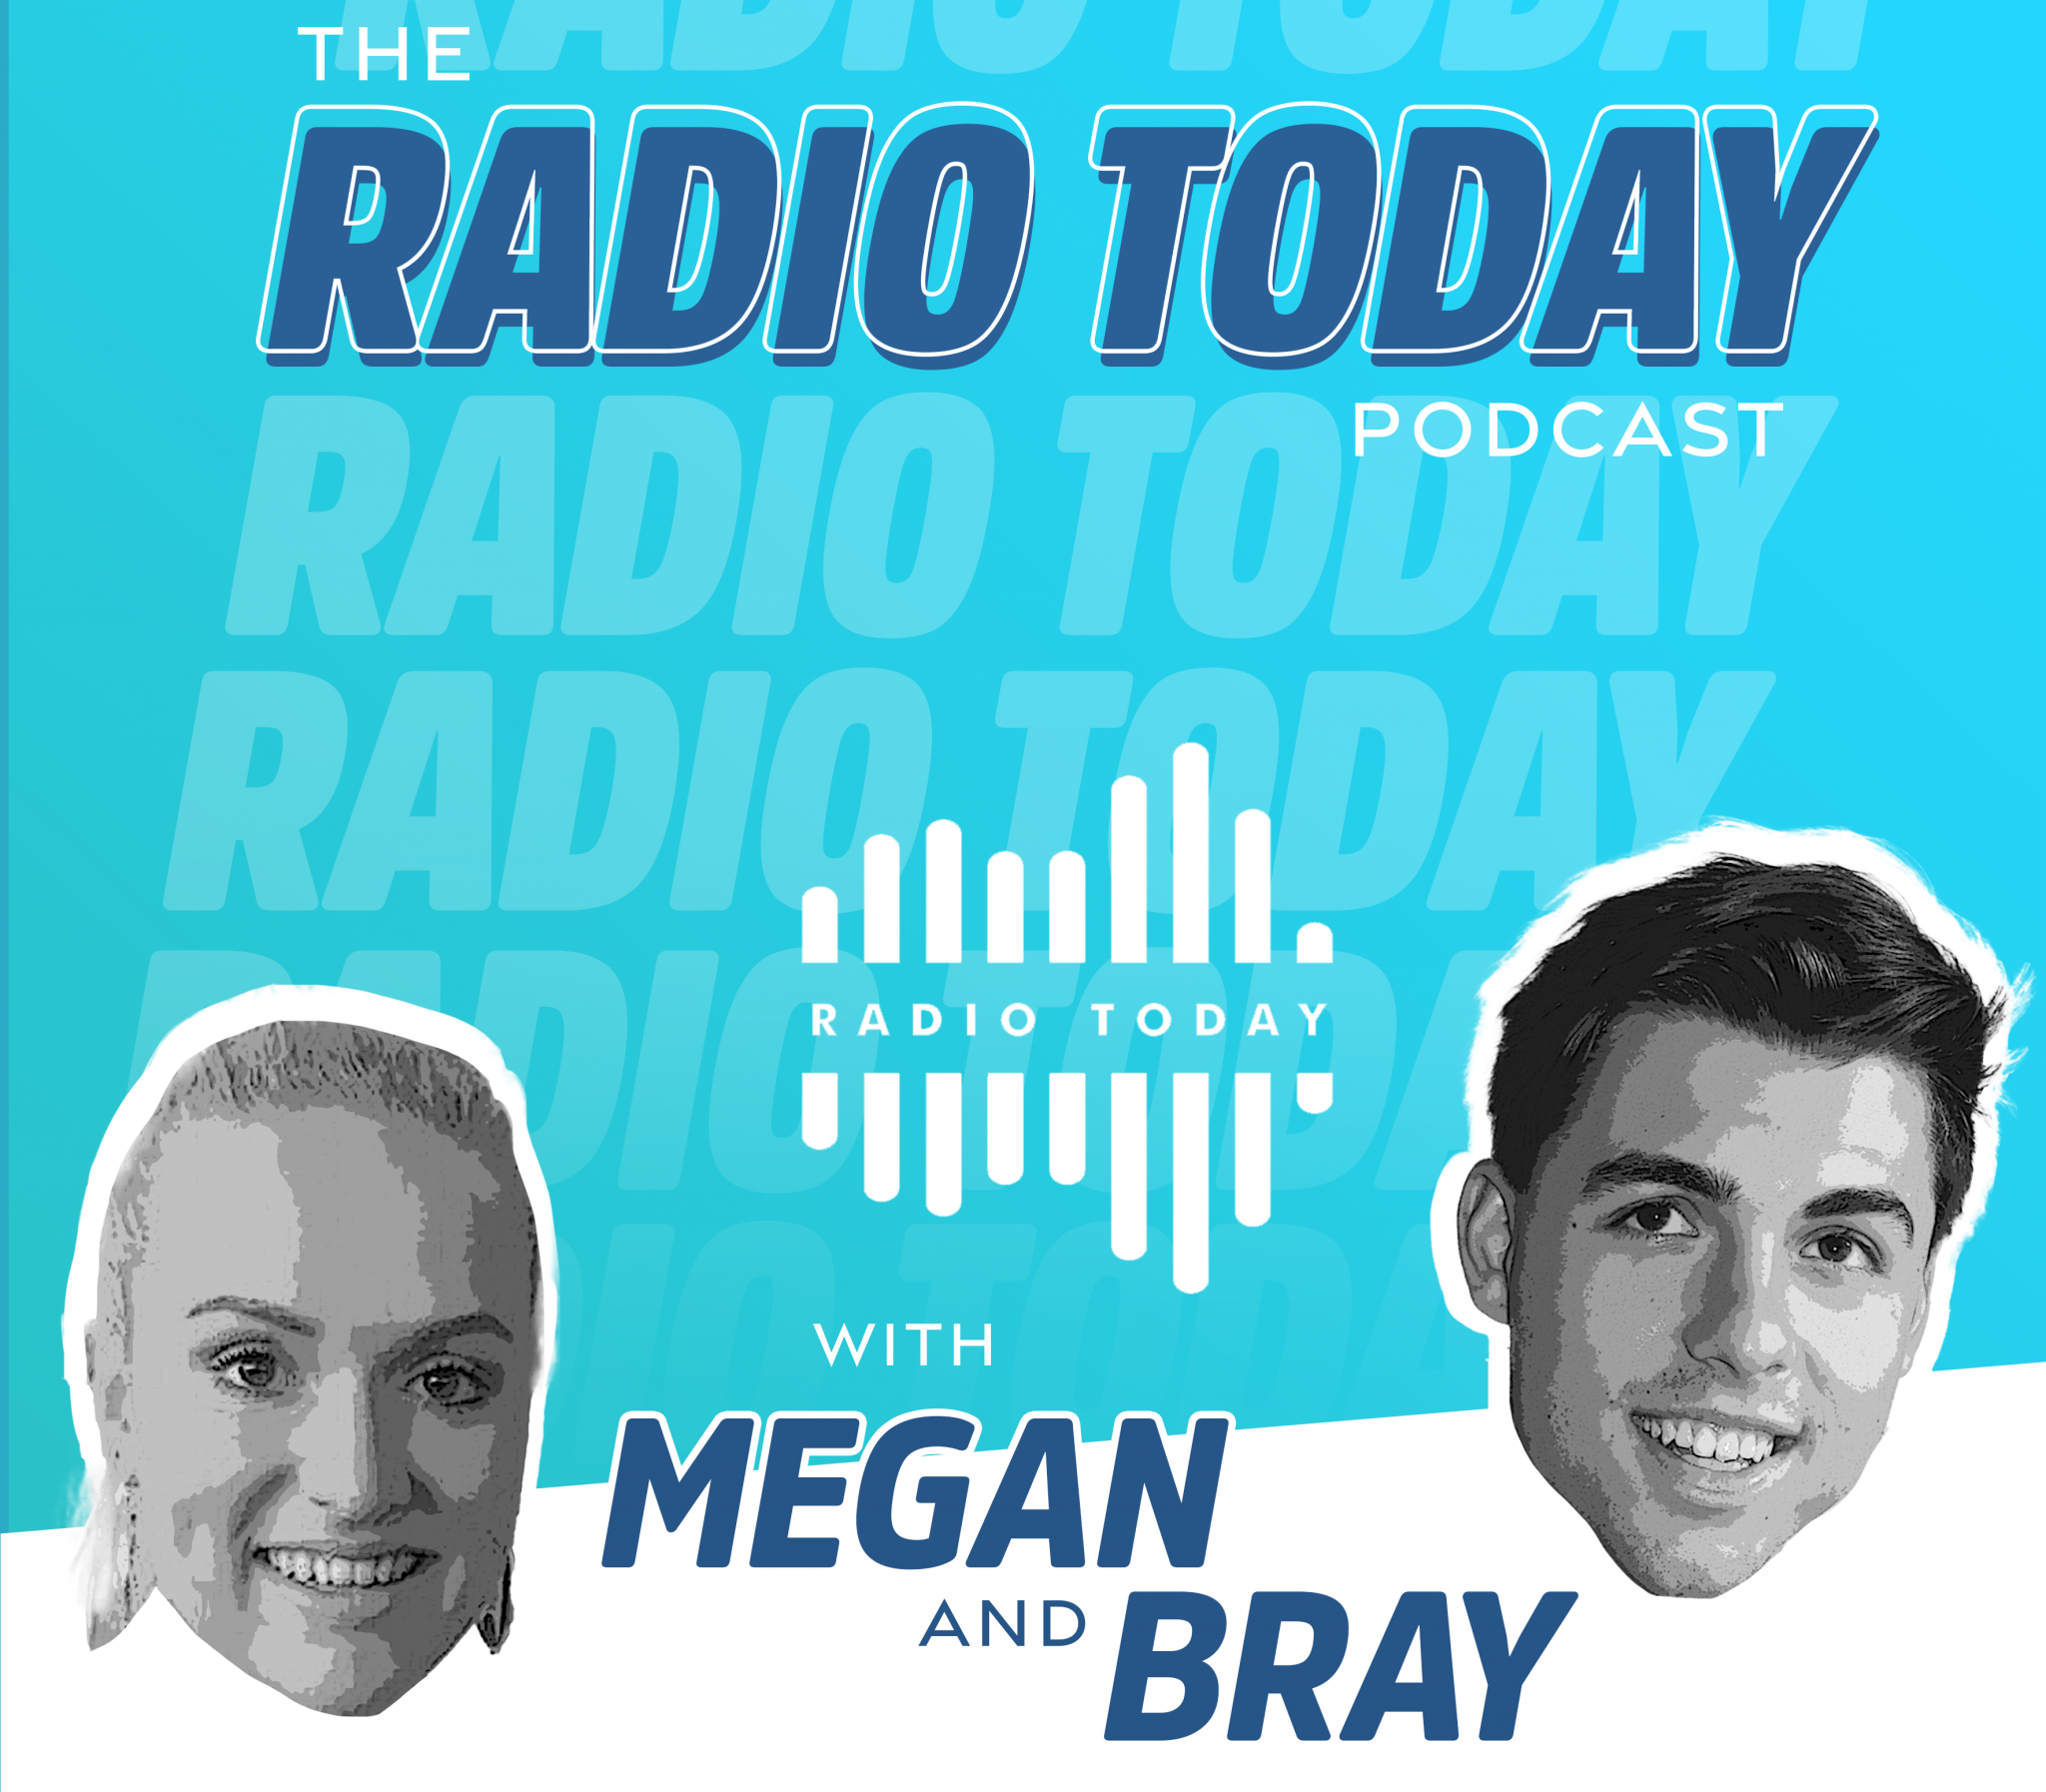 Radio Today: Spotify’s new ‘Broadcast to Podcast’ feature is integrated into Megaphone, 2RRR’s Bruce Flarrety sadly passes + more!